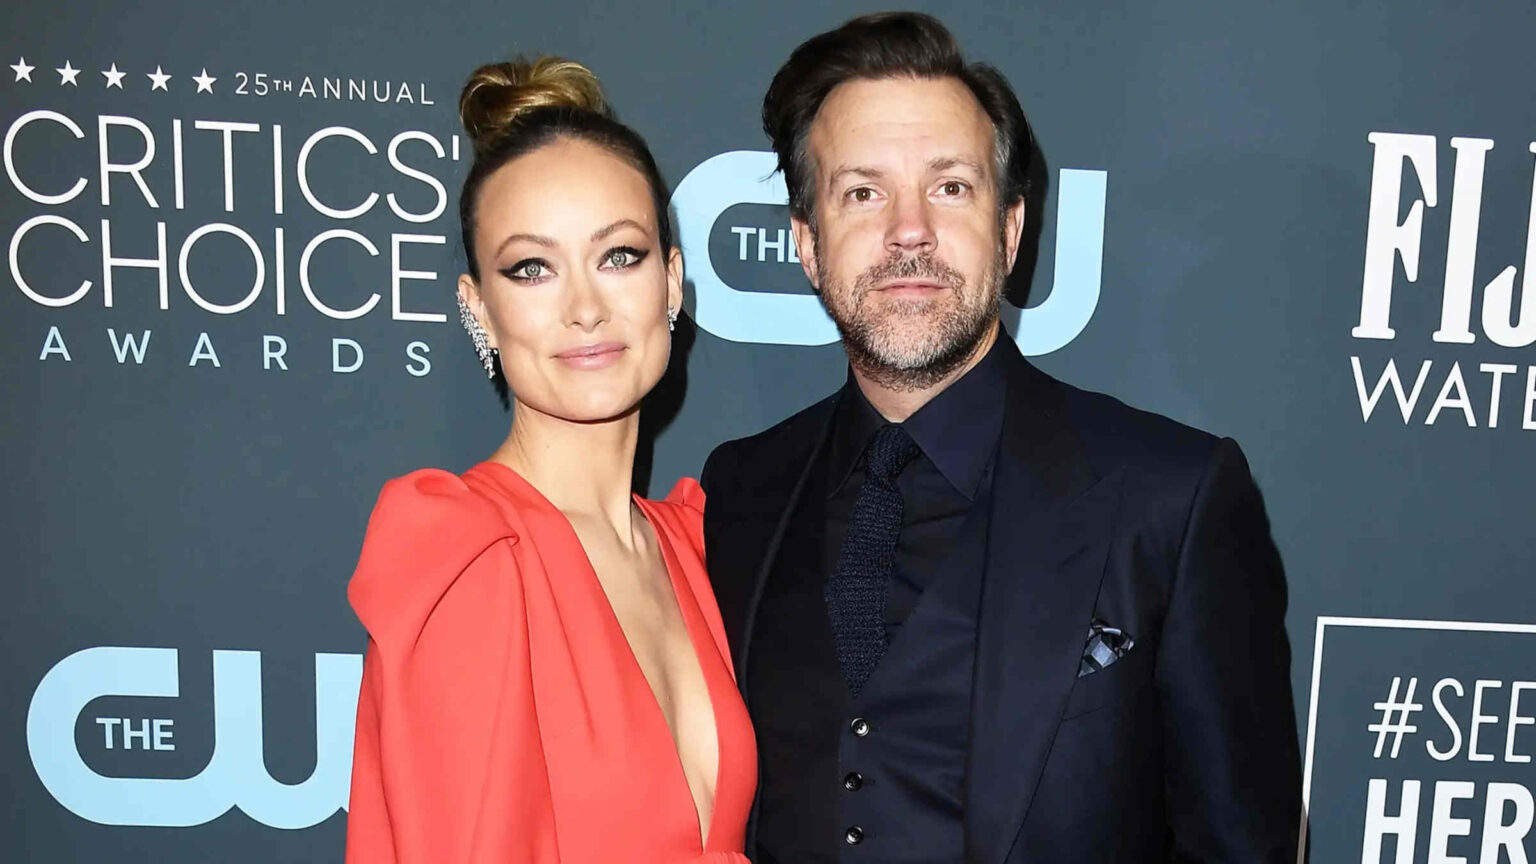 Break-ups can be a act of freedom for some, but for Olivia Wilde and Jason Sudeikis it could just be hurting their individual net worth.